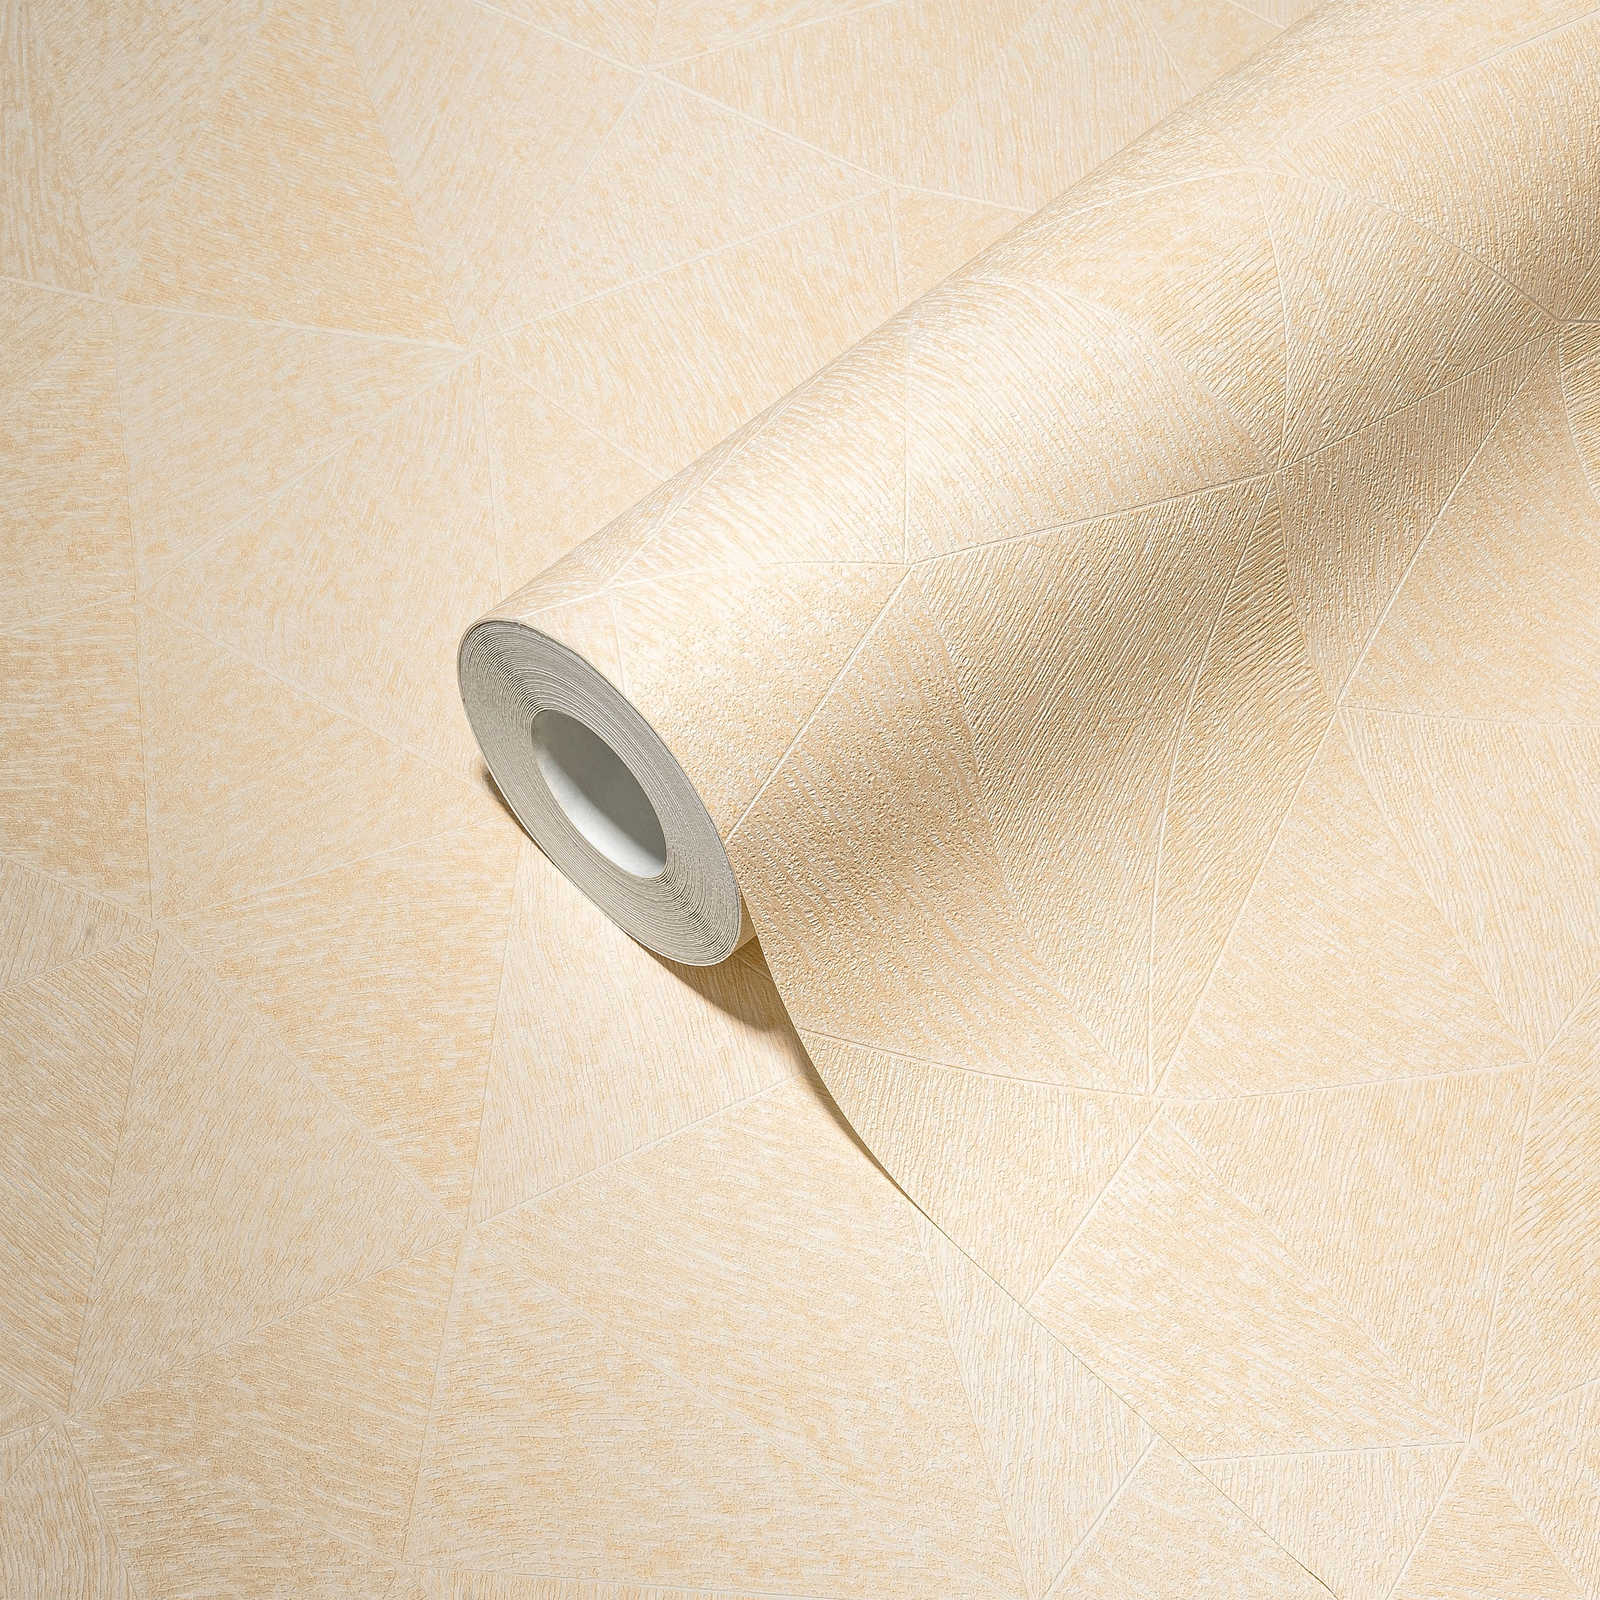             Graphic non-woven wallpaper with subtle pattern - beige
        